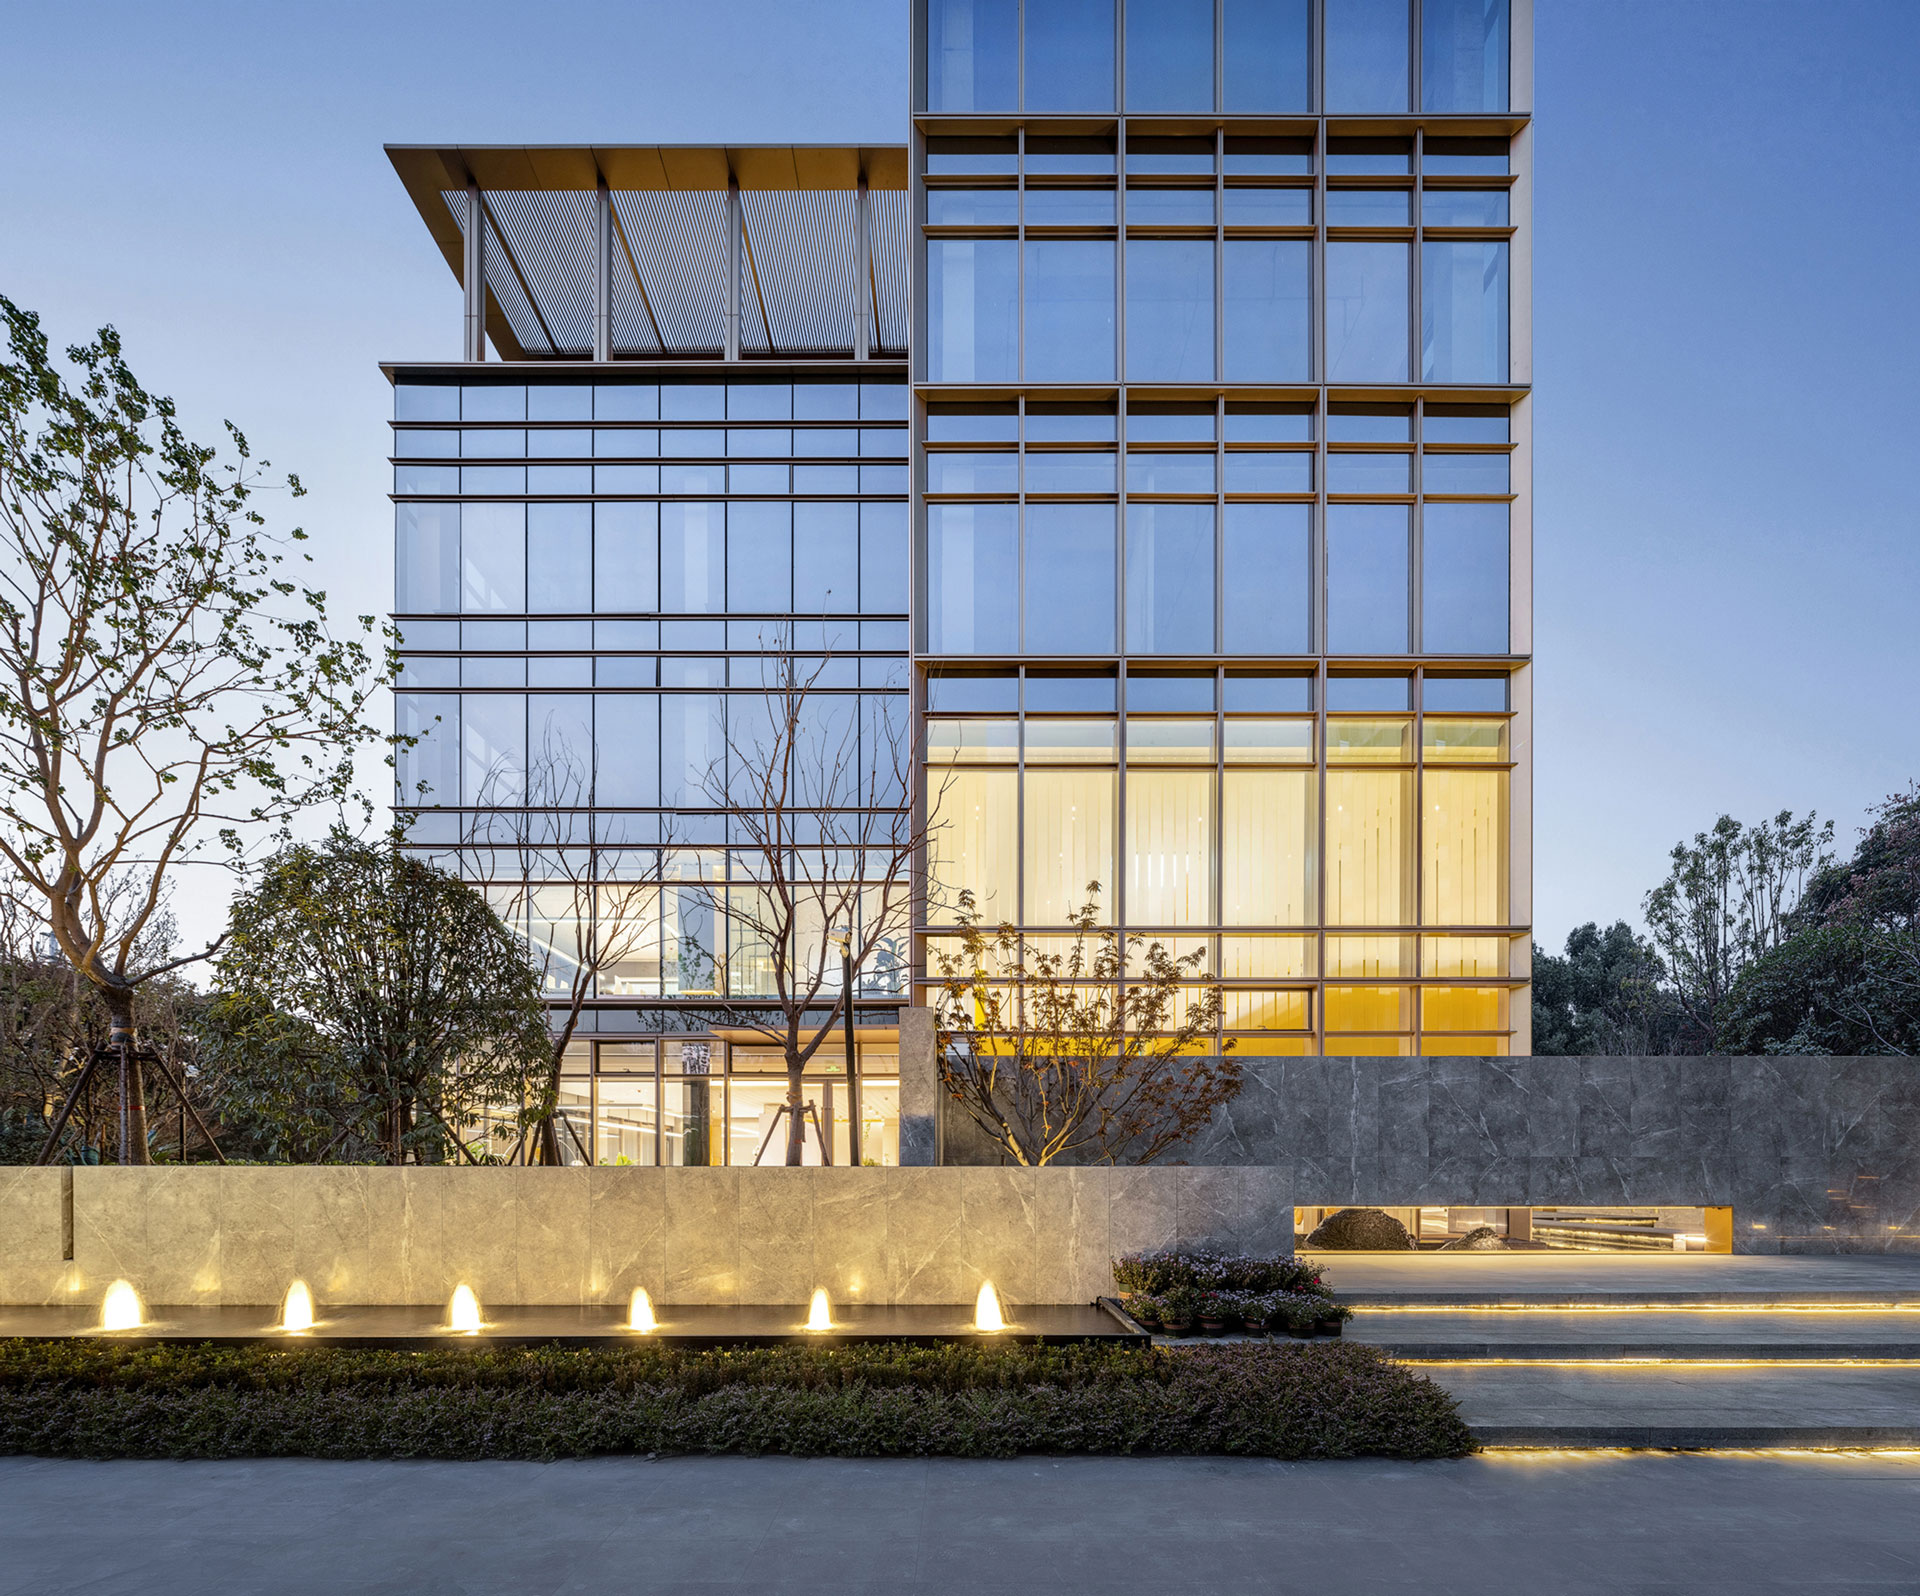 TITAN Property Awards - Hangzhou Gemdale Viseen Science and Technology Park